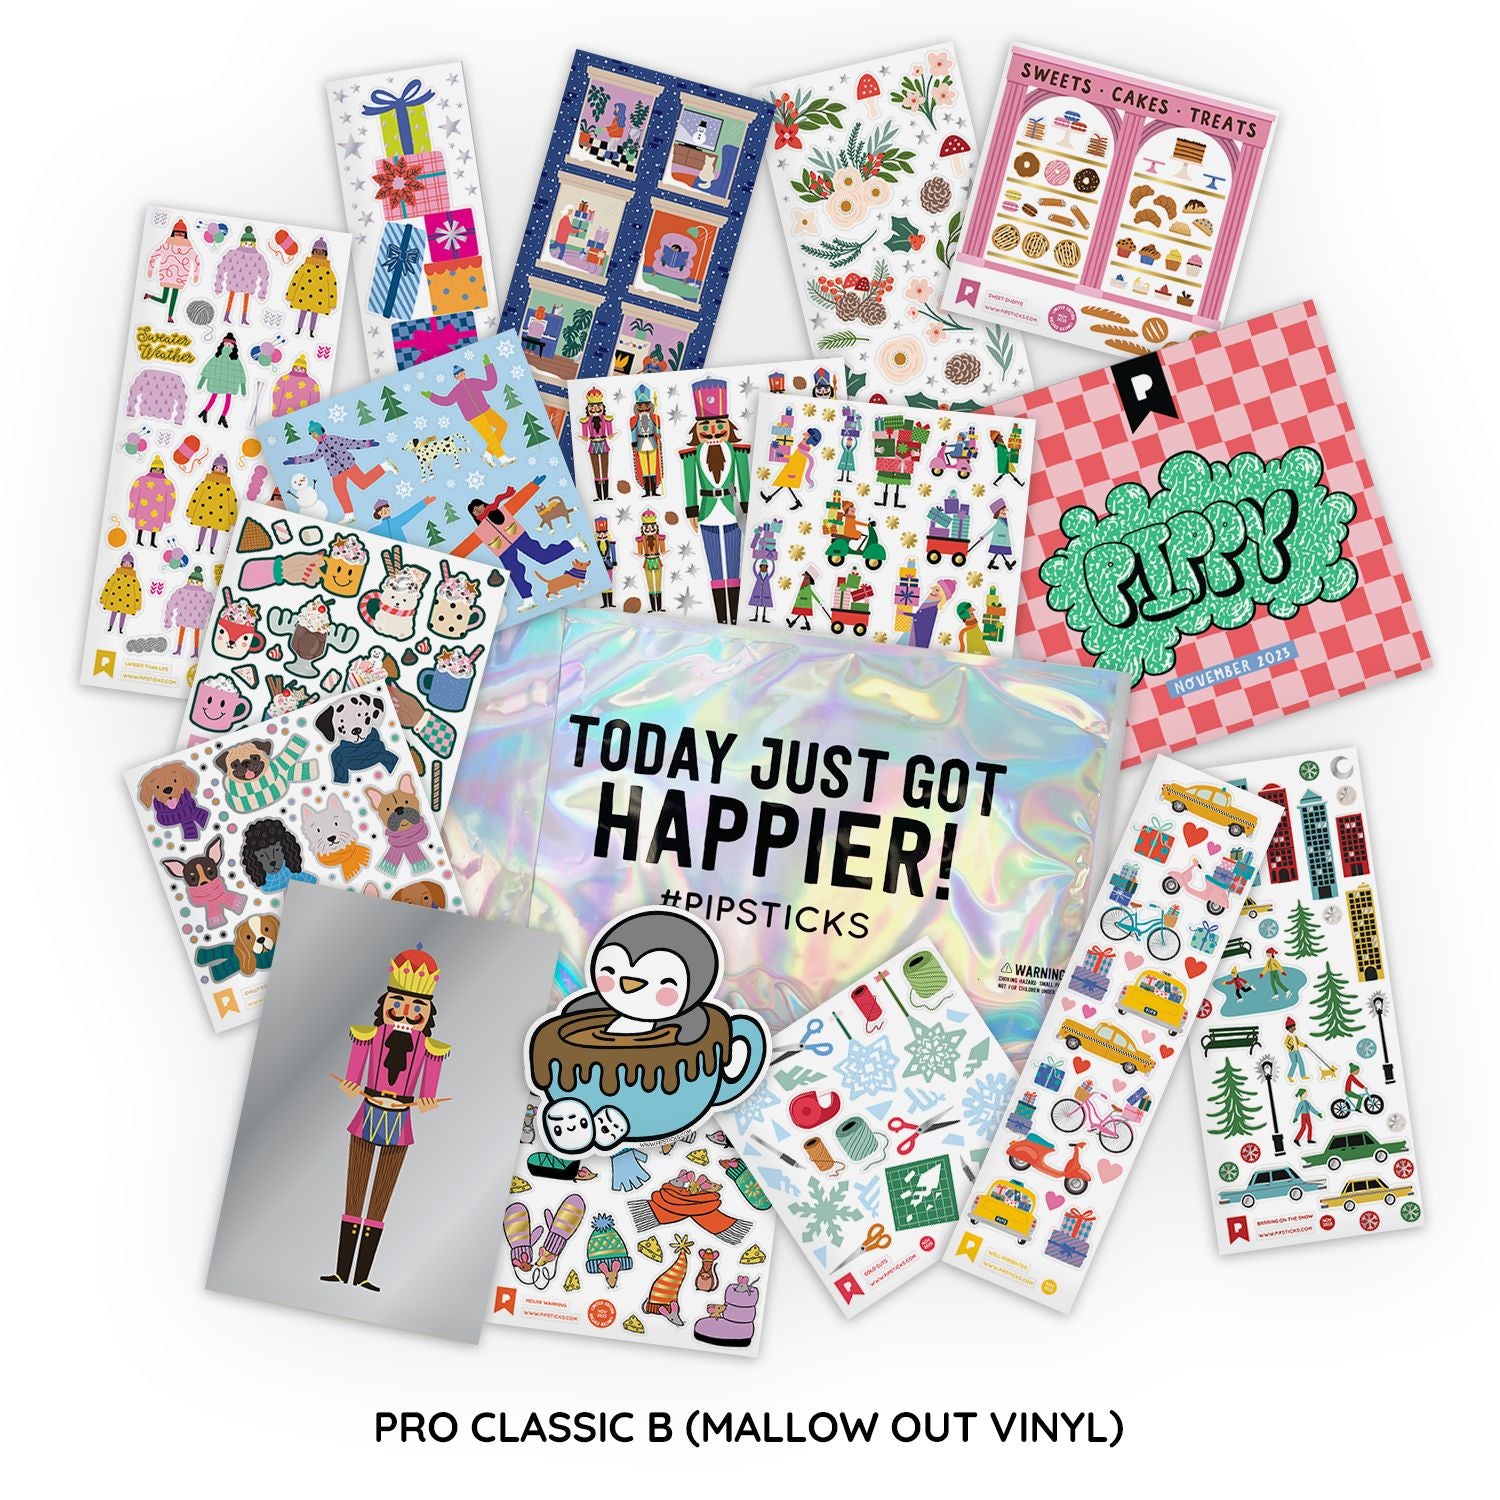 Pipsticks Stickers, You Had Me at Meow - FLAX art & design